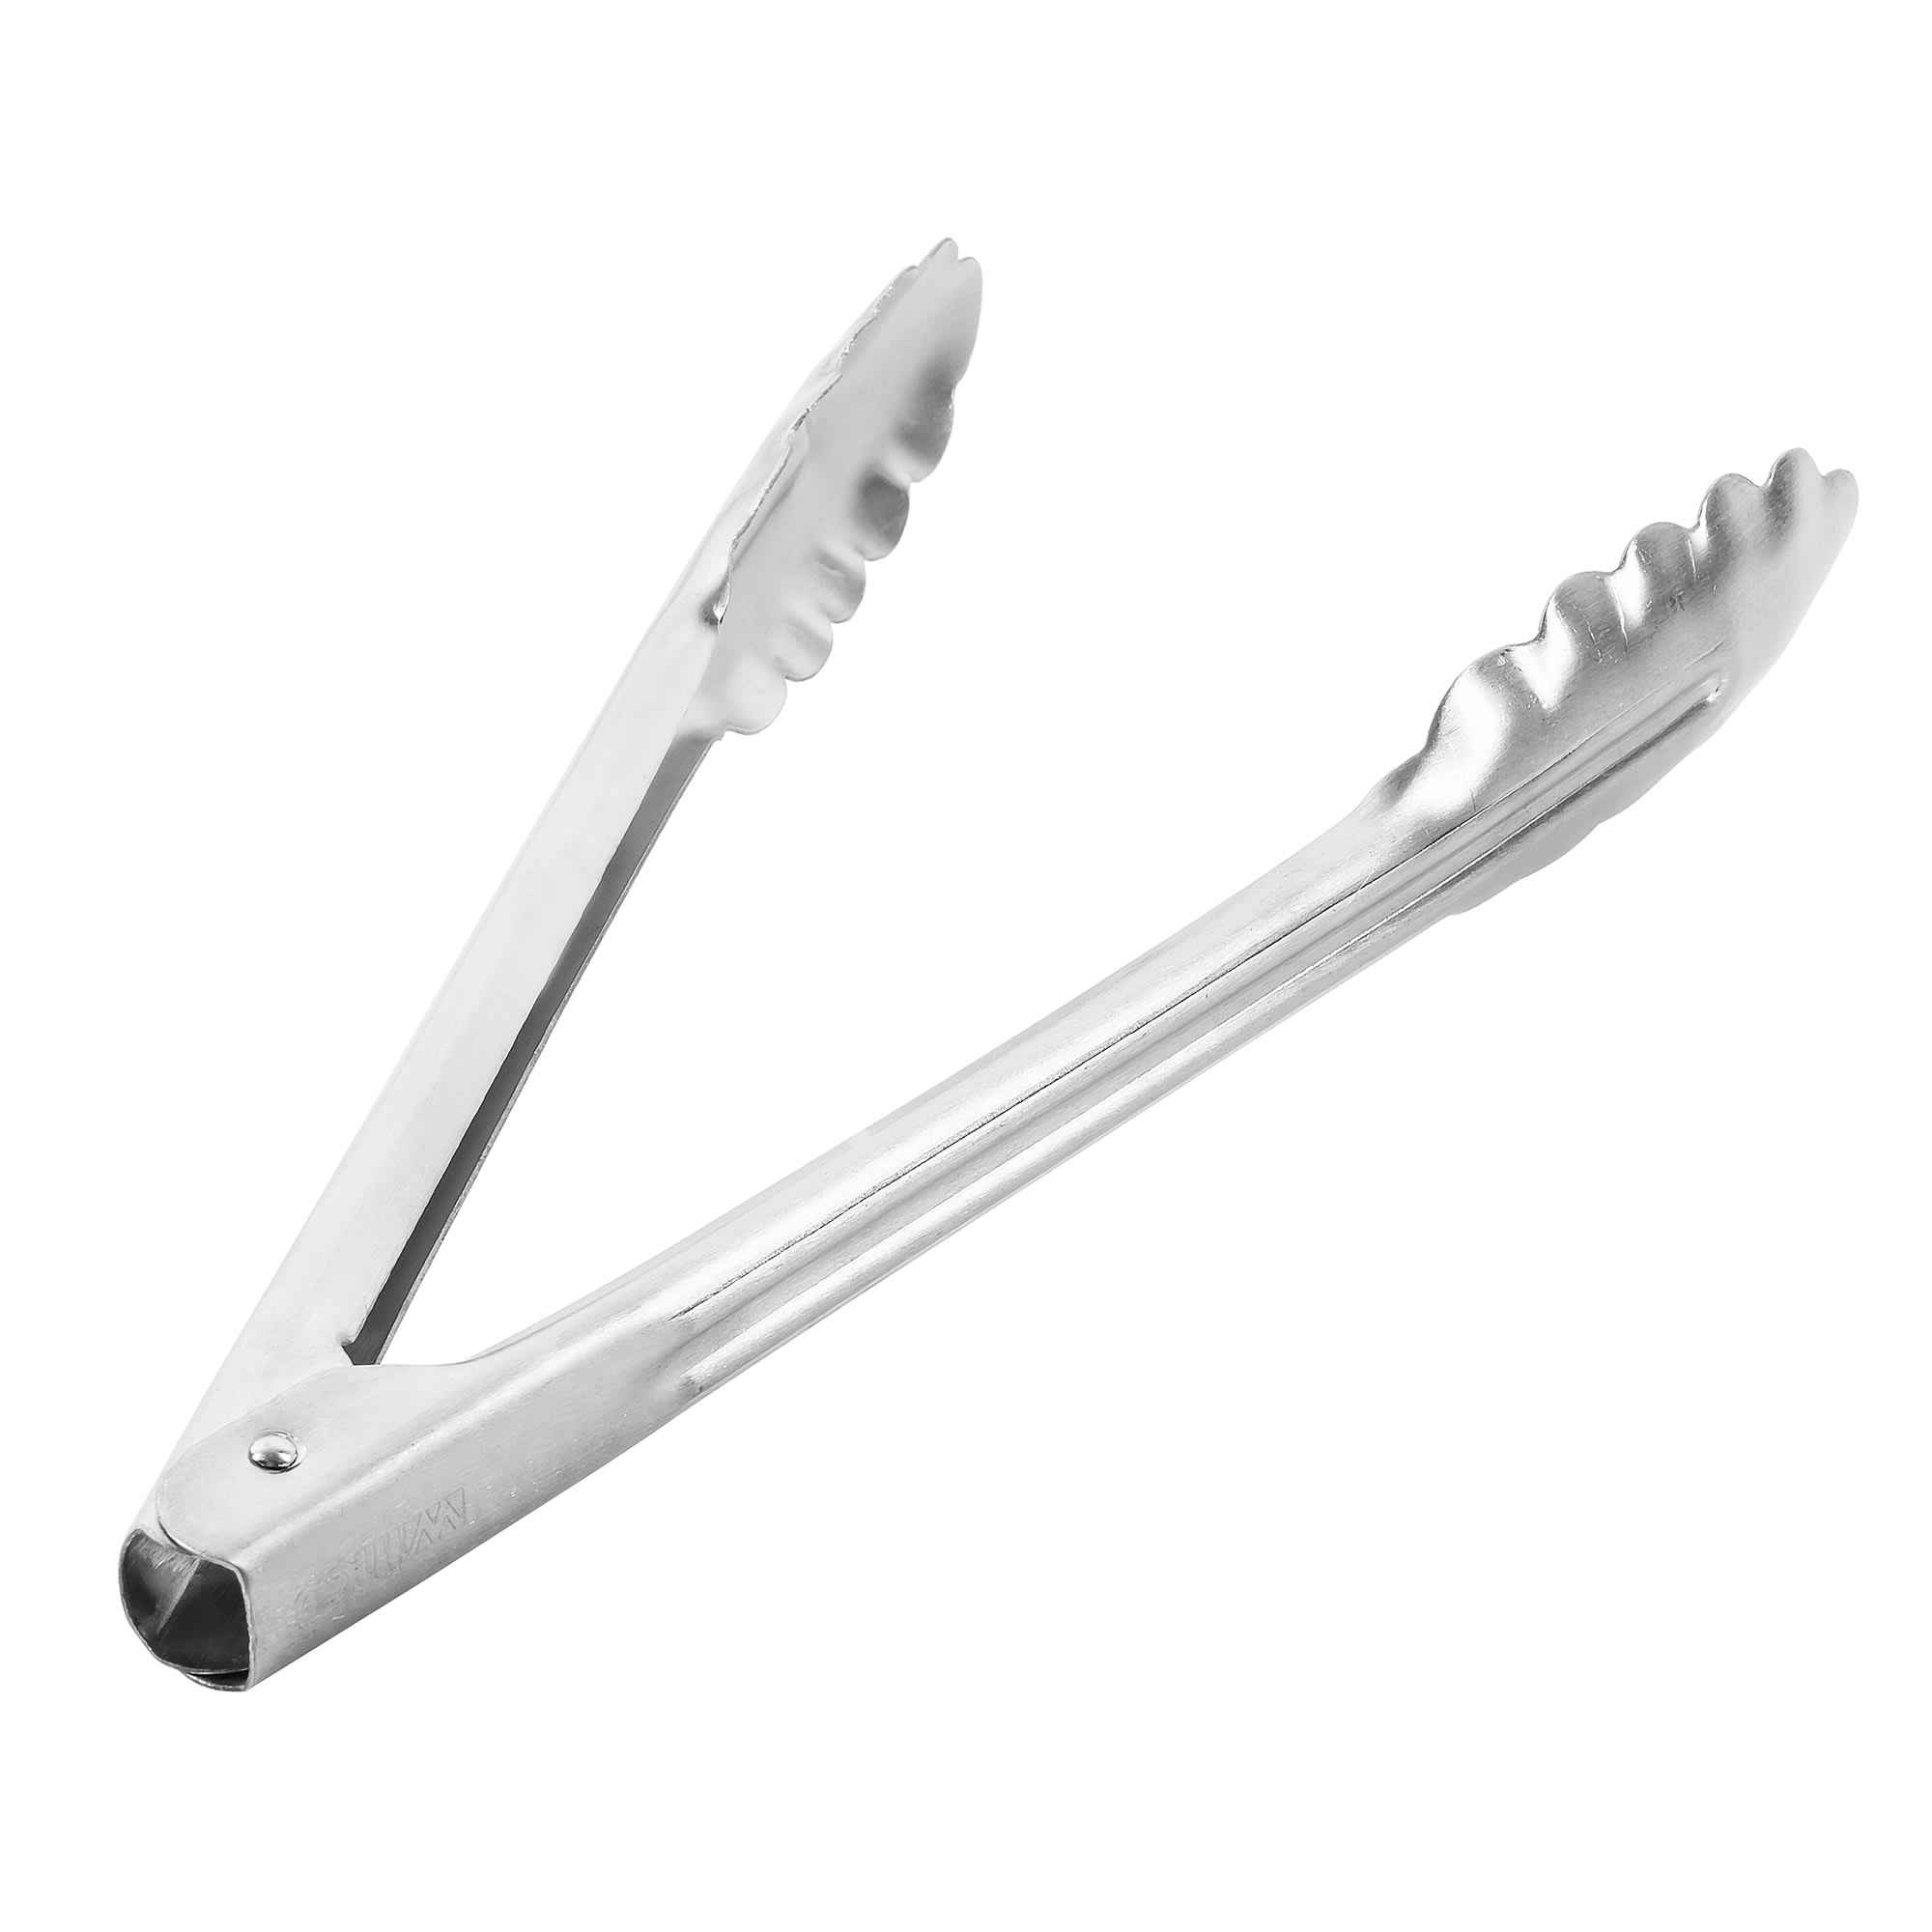 Winco 9-Inch Non-Slip Locking Tongs Stainless Steel 4 Pack